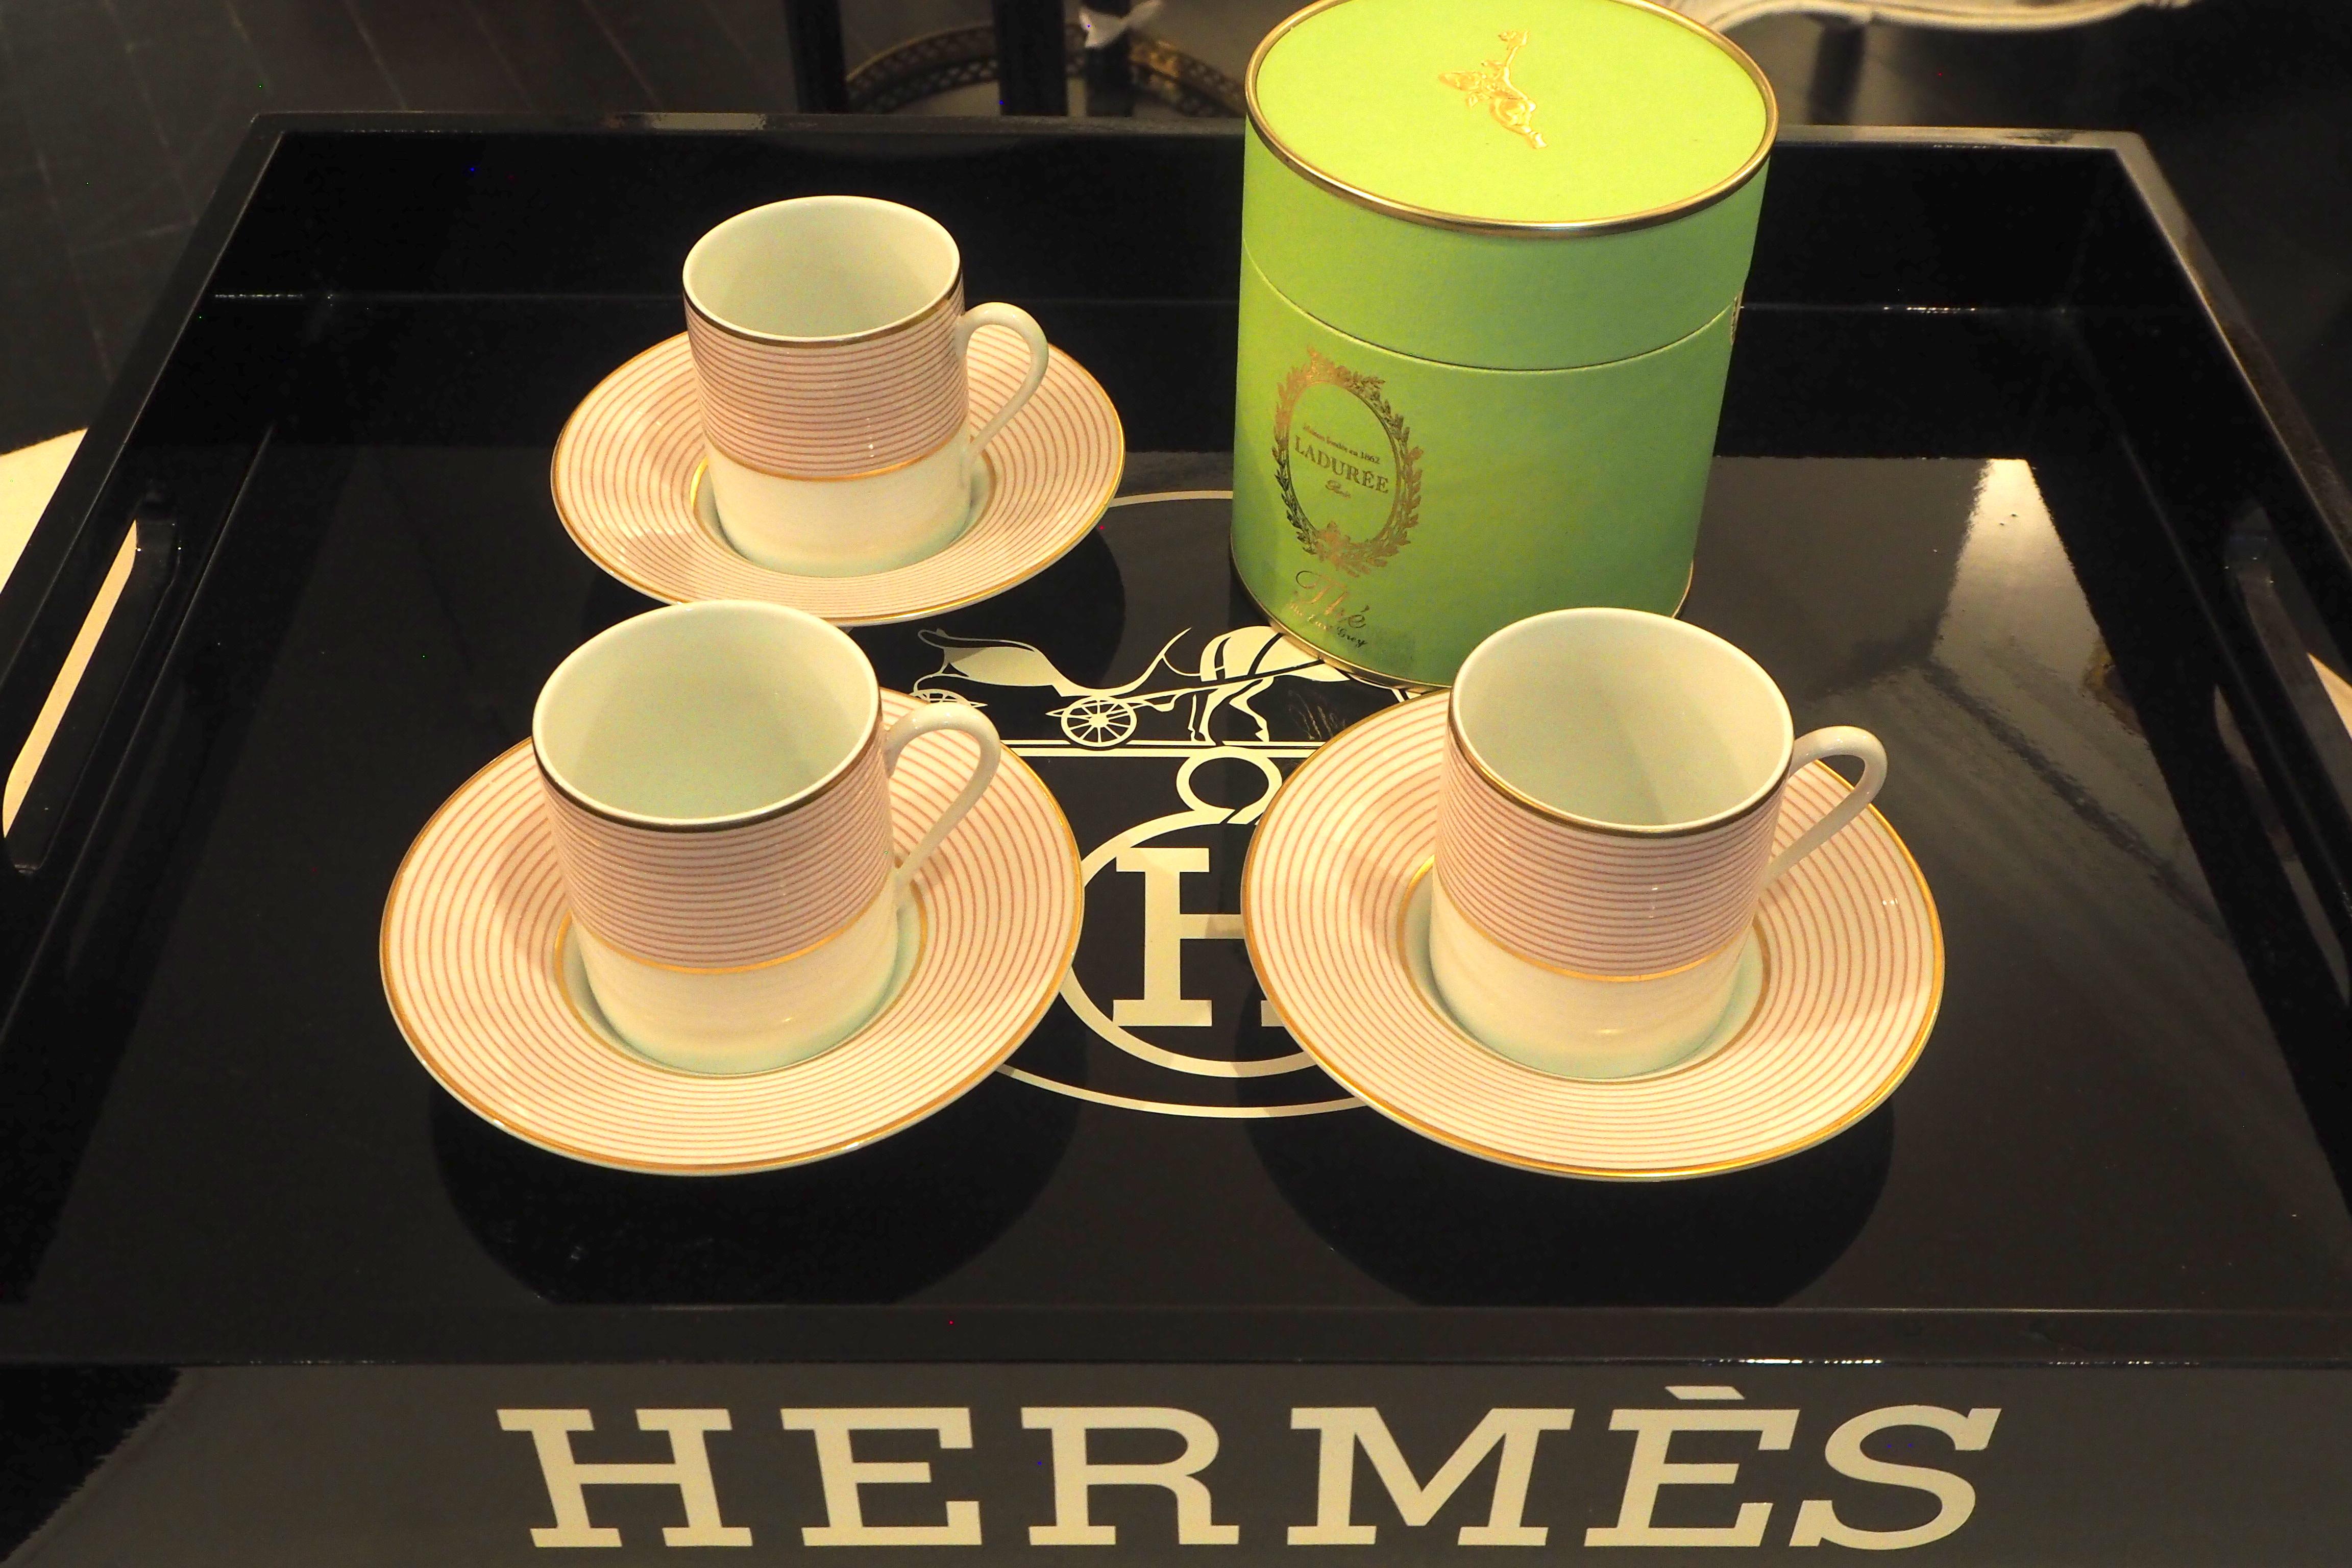 20th Century Set of French Coffee Cups and Saucers from La Maison Raynaud, Limoges